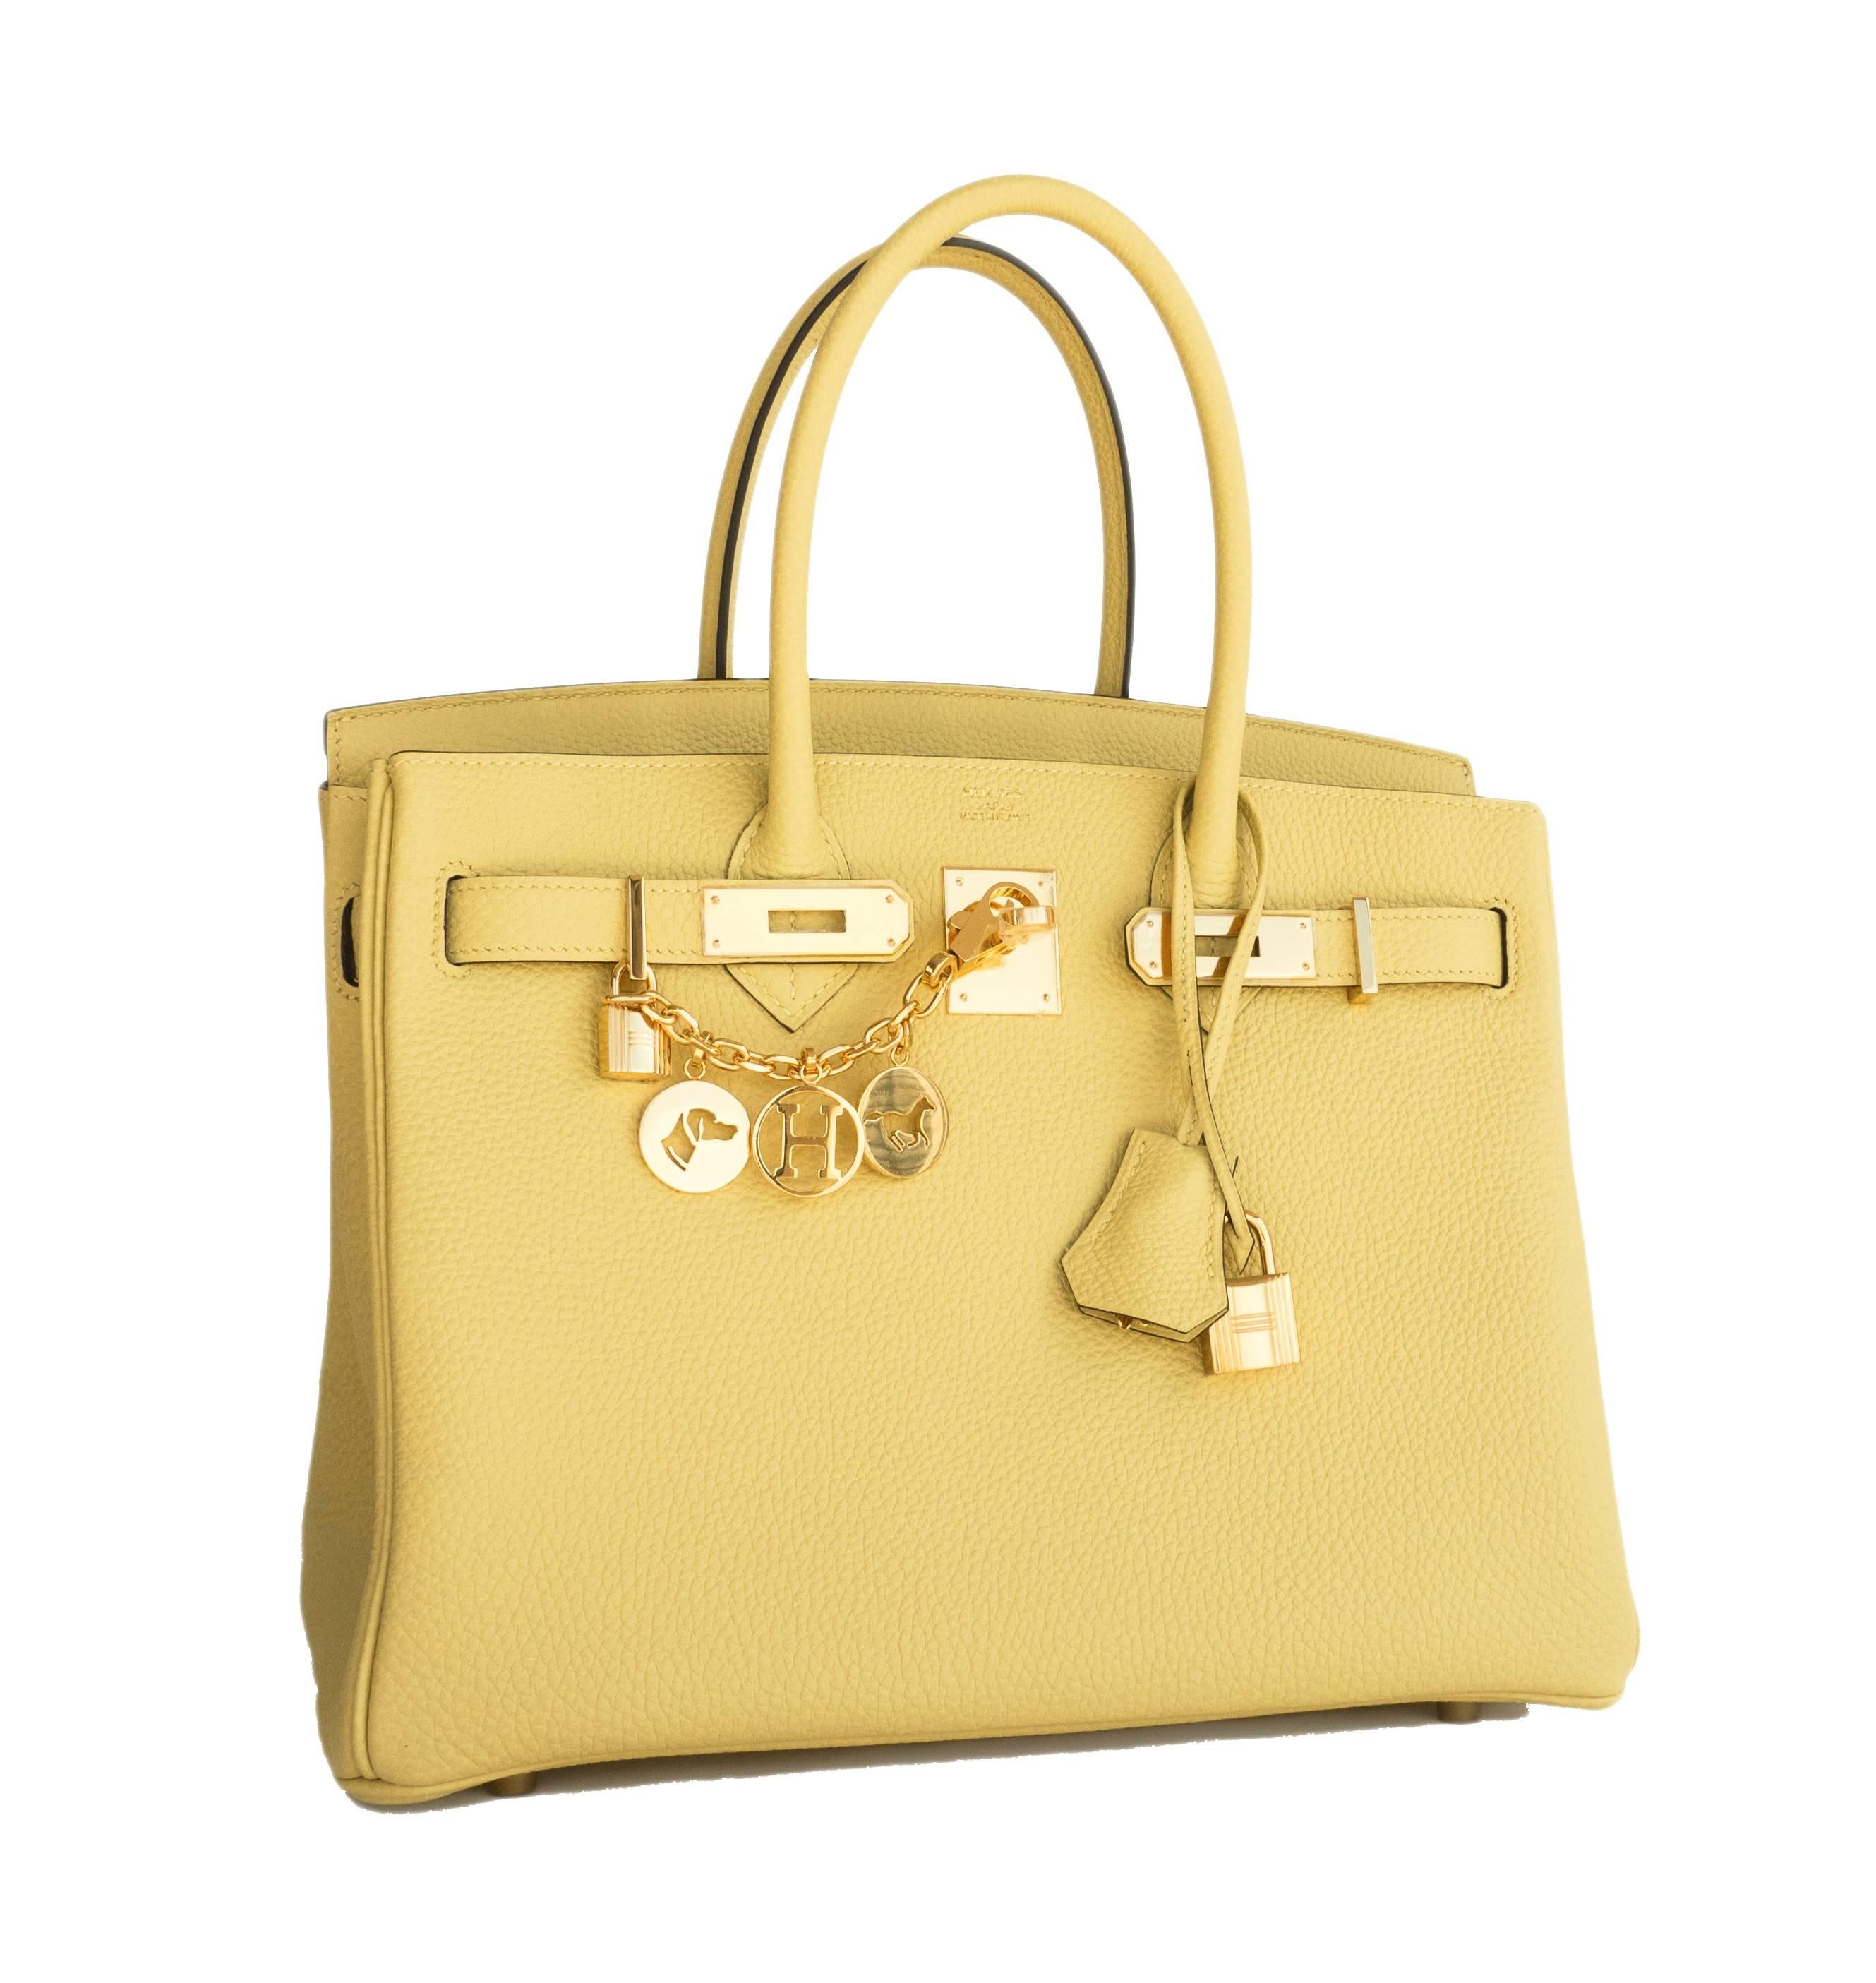 Store fresh. Pristine condition. T stamp. 
Perfect gift! Comes with keys, lock, clochette, a sleeper for the bag, rain protector, Hermes ribbon, and original box.  
Jaune Poussin is Hermes' newest pale yellow.
The color is so chic and